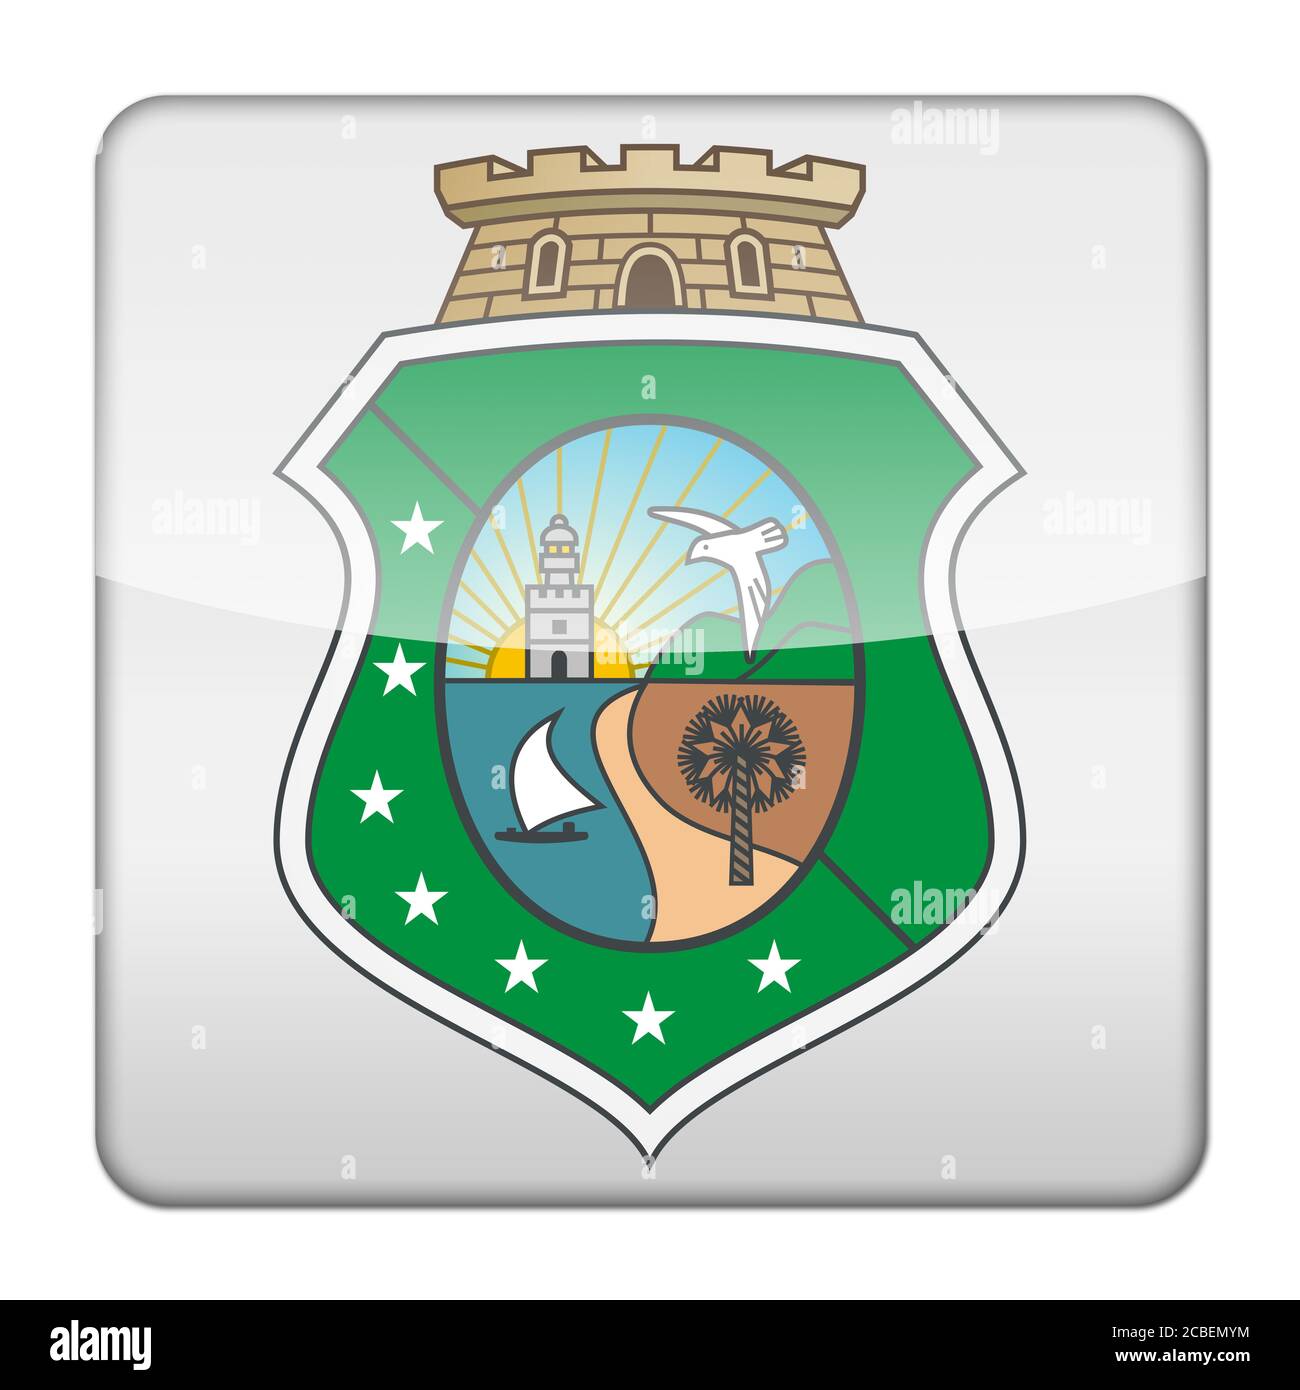 Glossy logo icon app flag seal of the Brazilian state Ceara Stock Photo